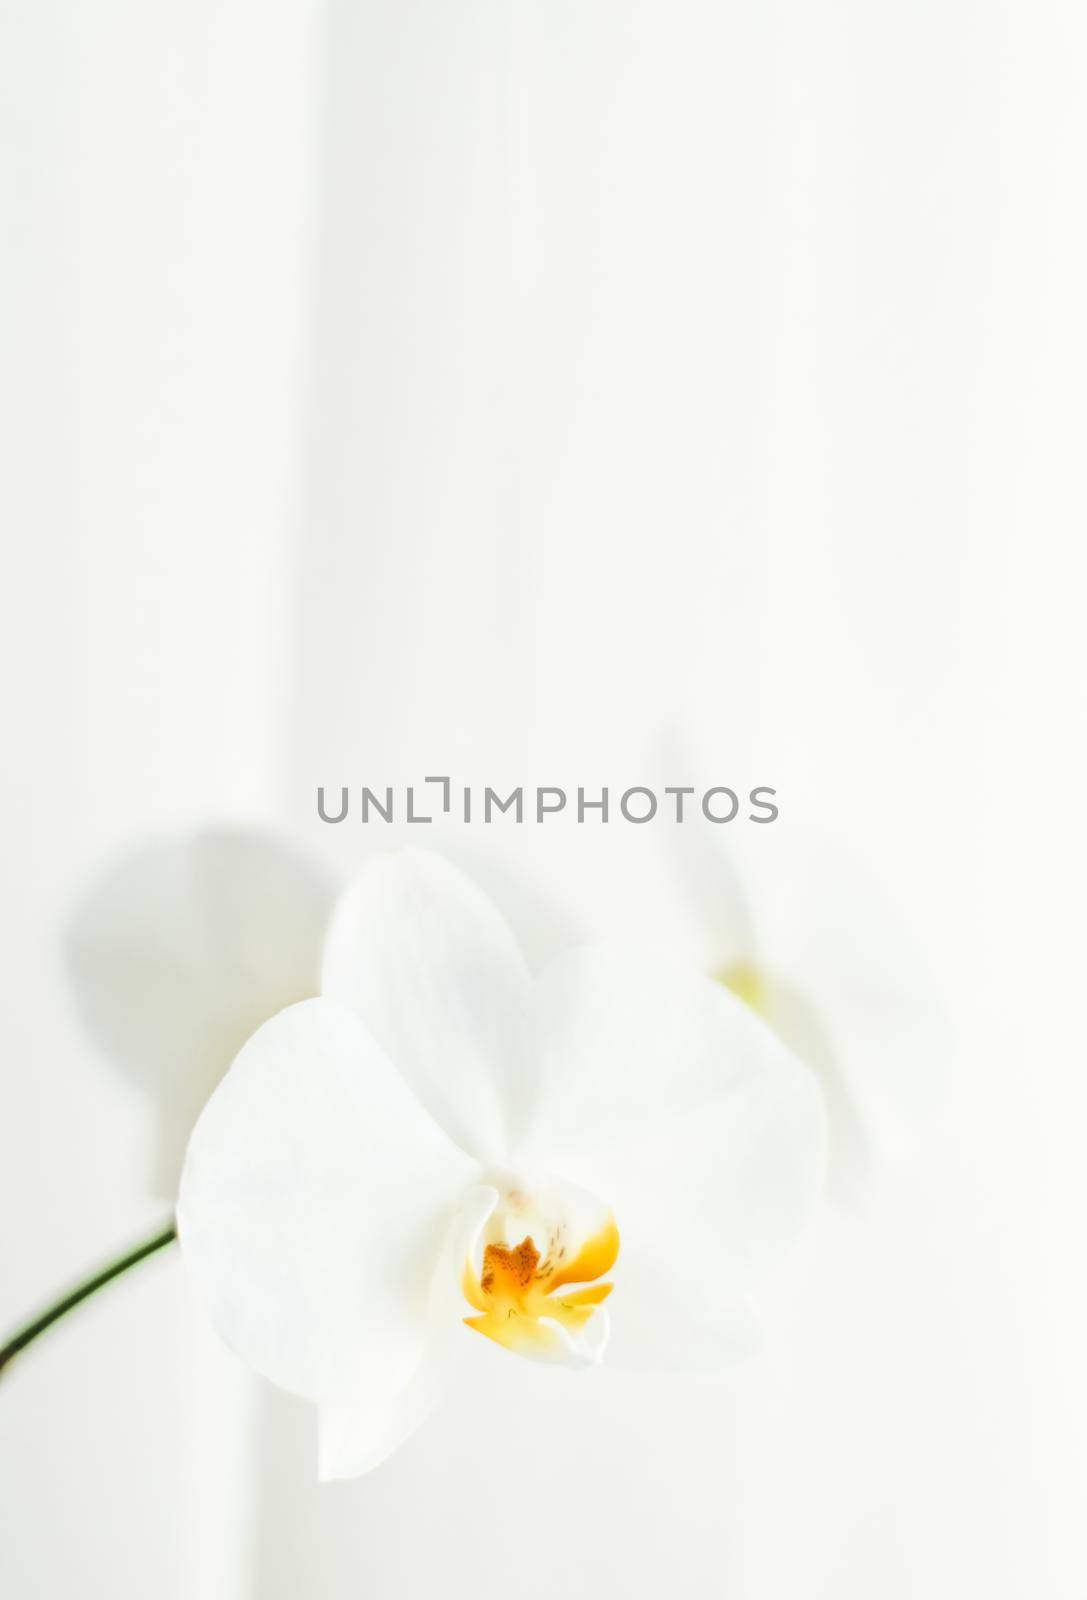 White orchid flower in bloom, abstract floral blossom art background and flowers in nature for wedding invitation and luxury beauty brand holiday design by Anneleven